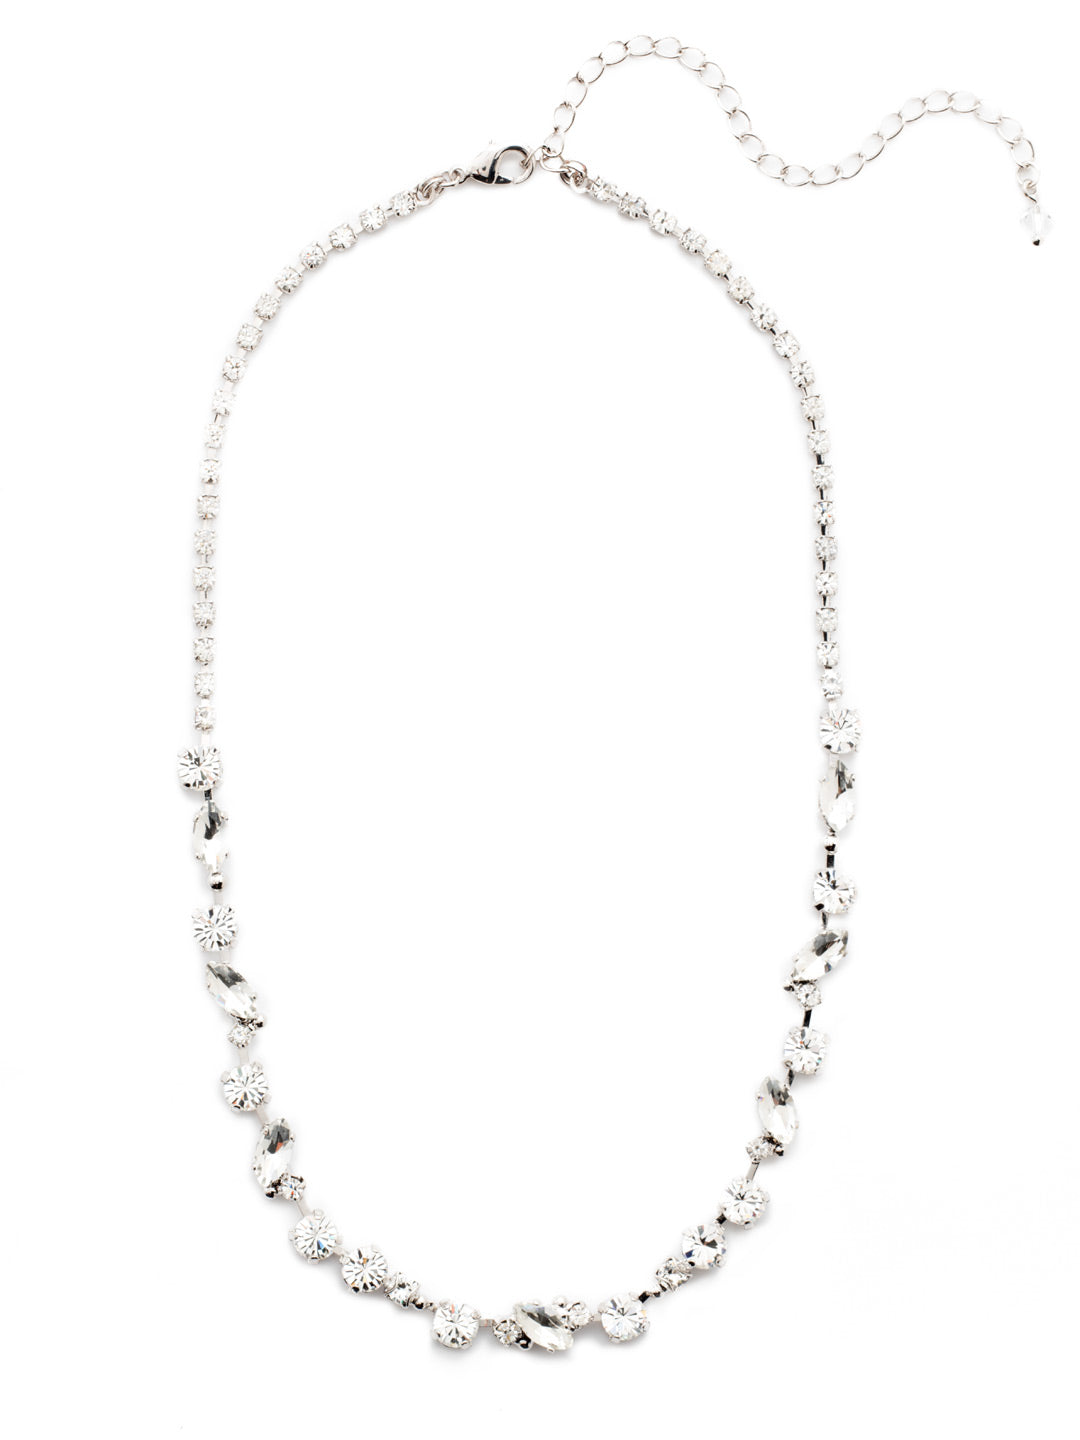 Simply Stated Tennis Necklace - NDN1RHCRY